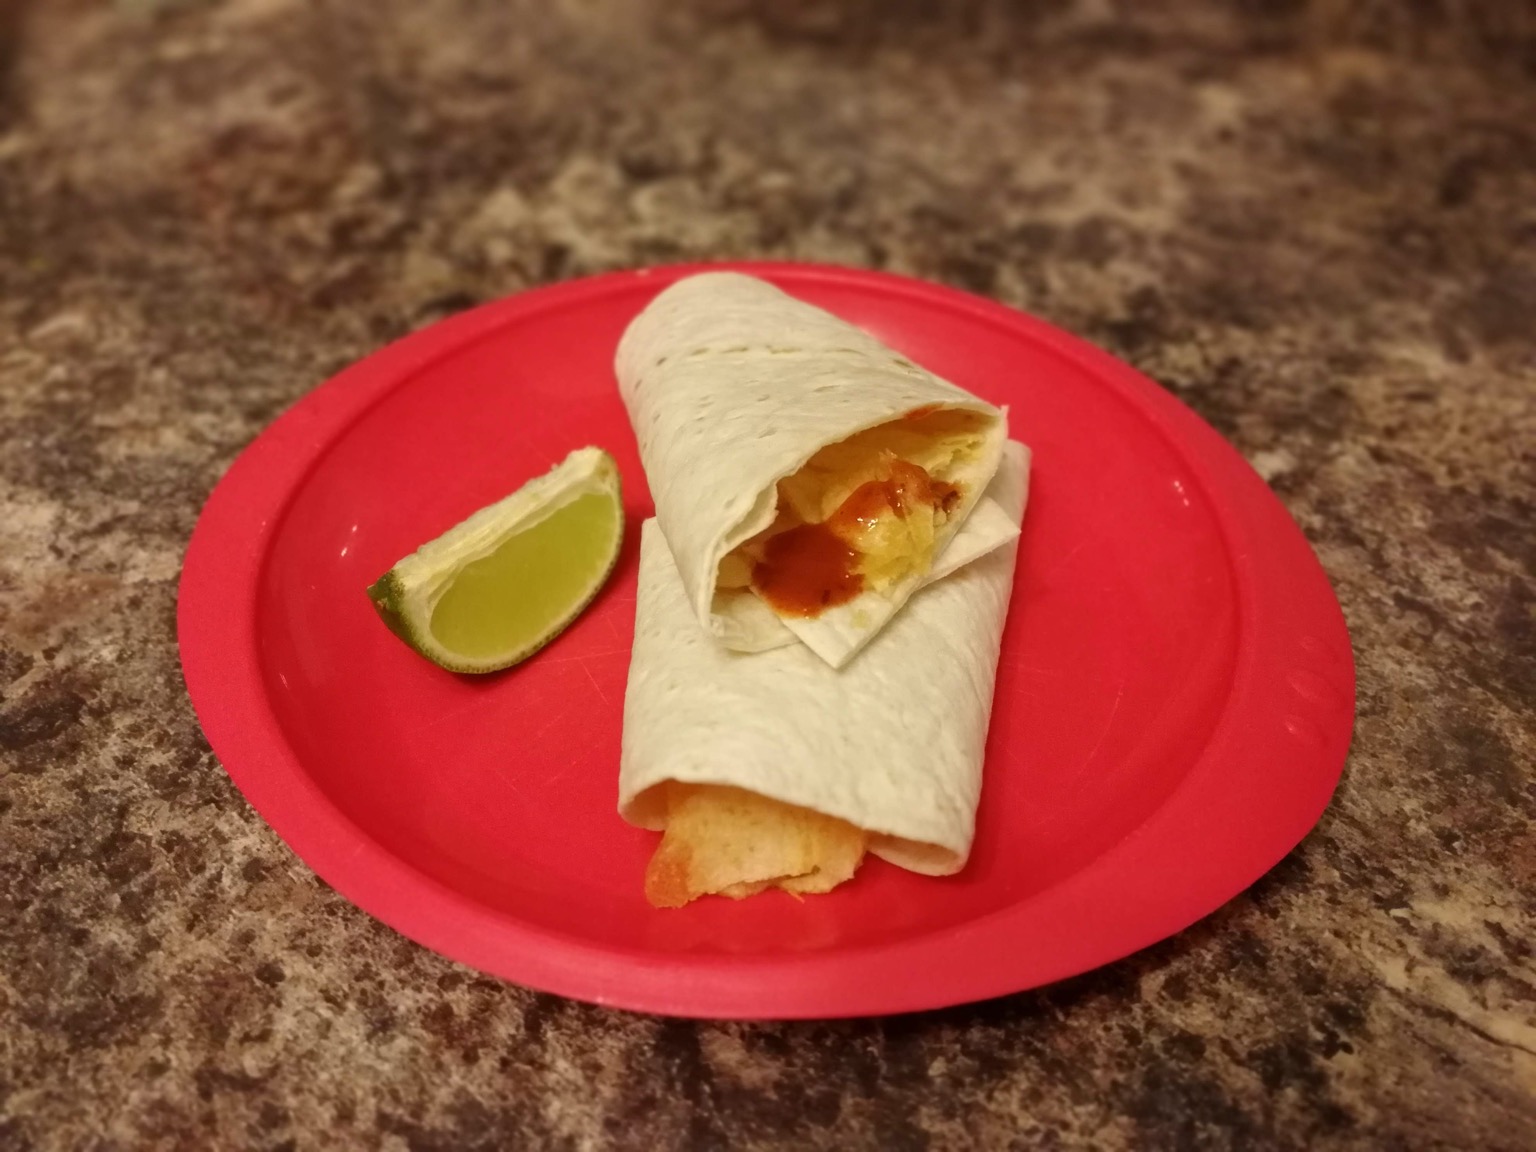 Wrap containing crisps and sauce alongside lime